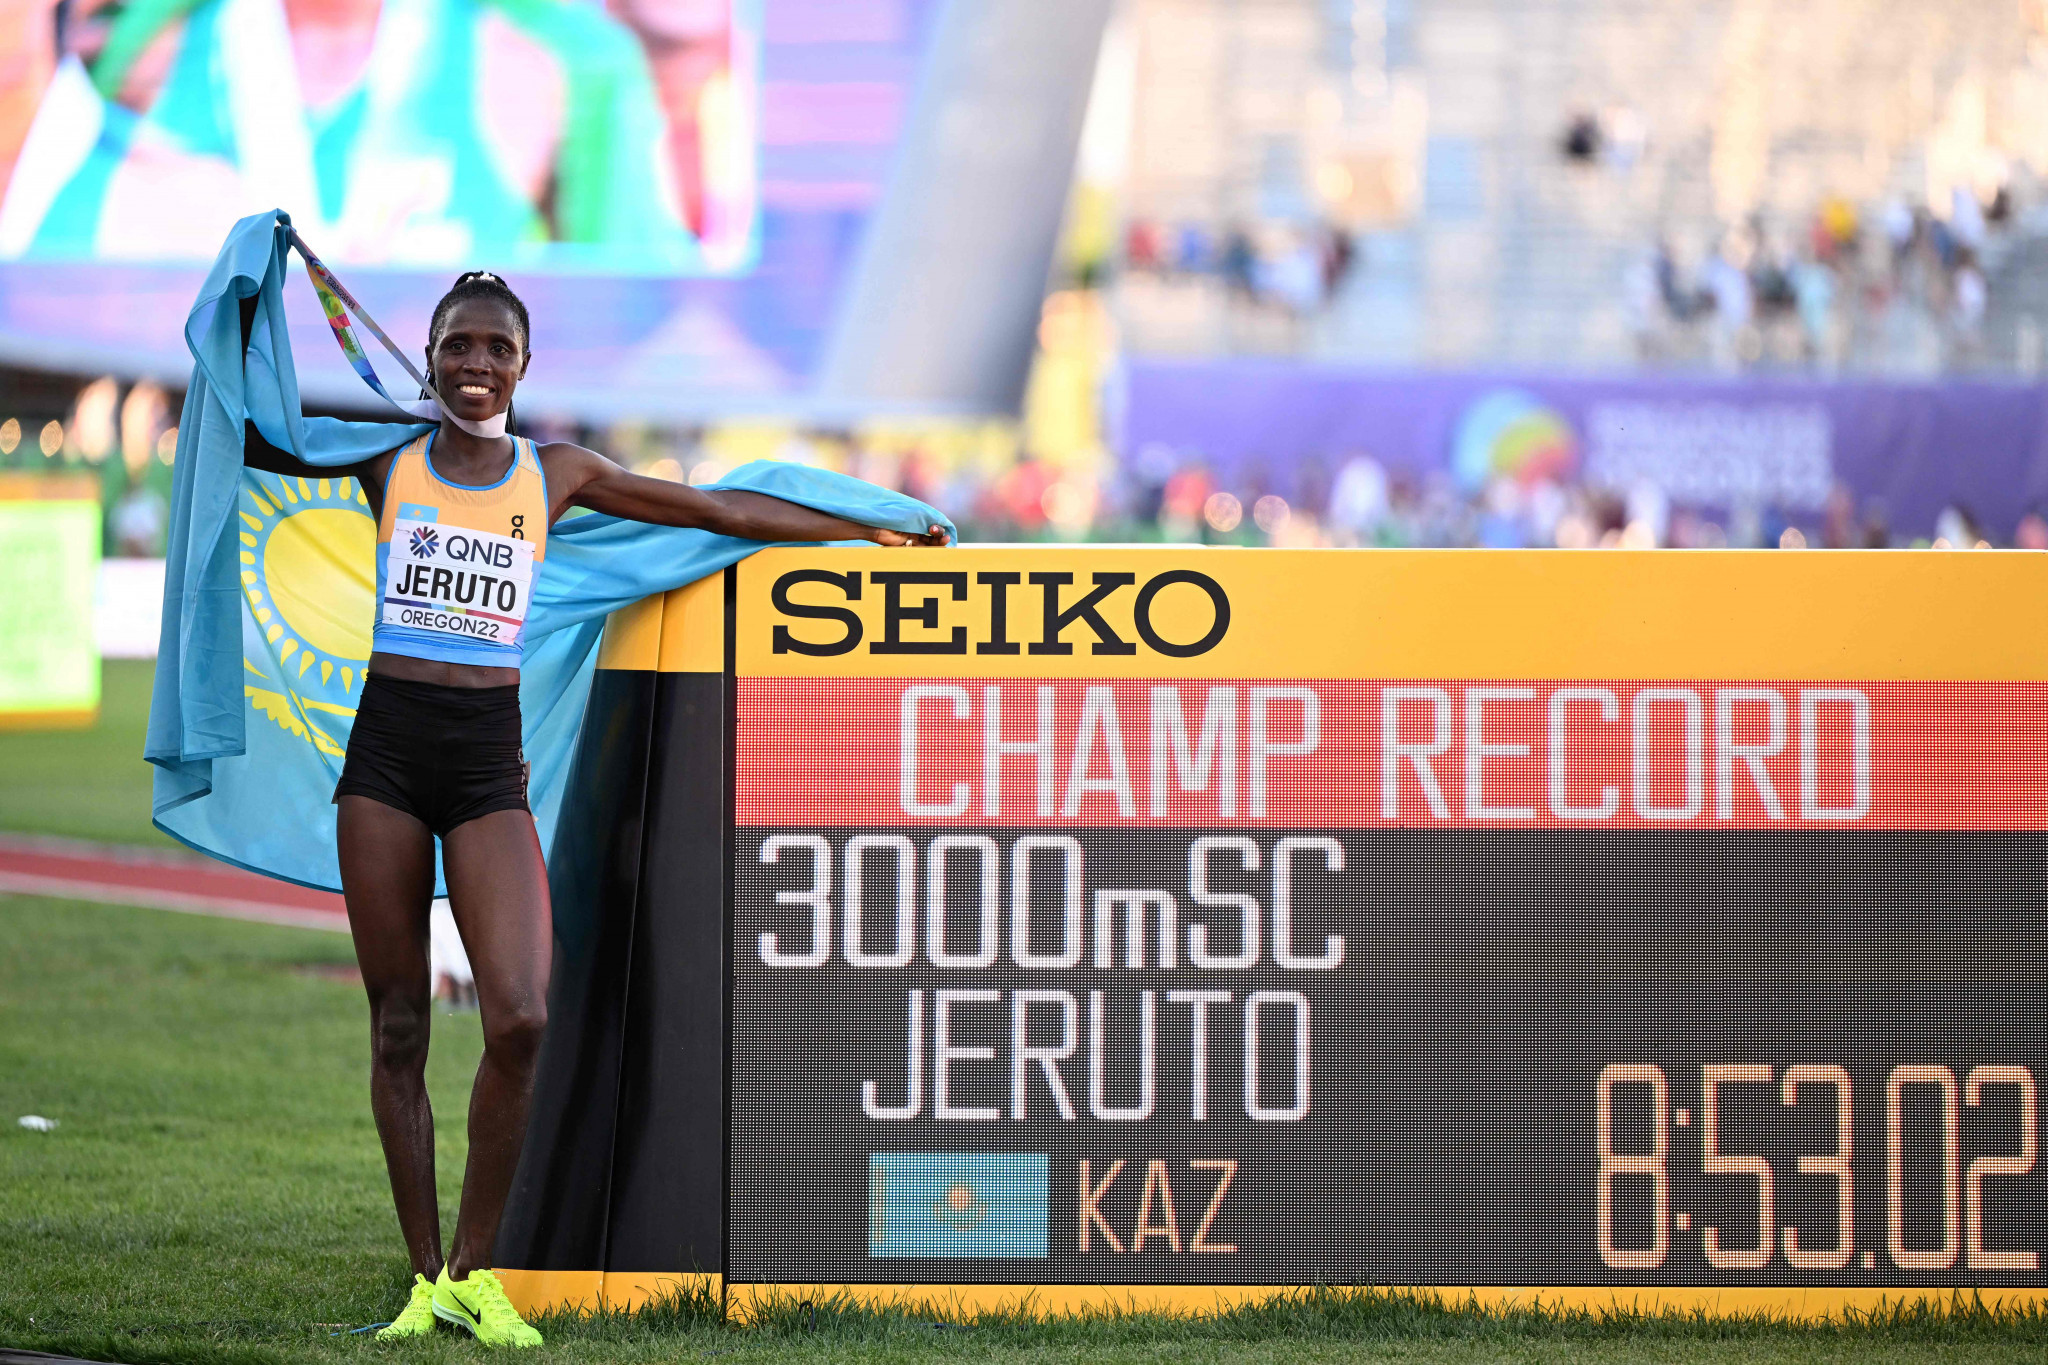 Kazakhstan's Kenyan-born Norah Jeruto clocked in after a record 8min 53.02sec in the women's 3000 meters steeplechase in Eugene ©Getty Images